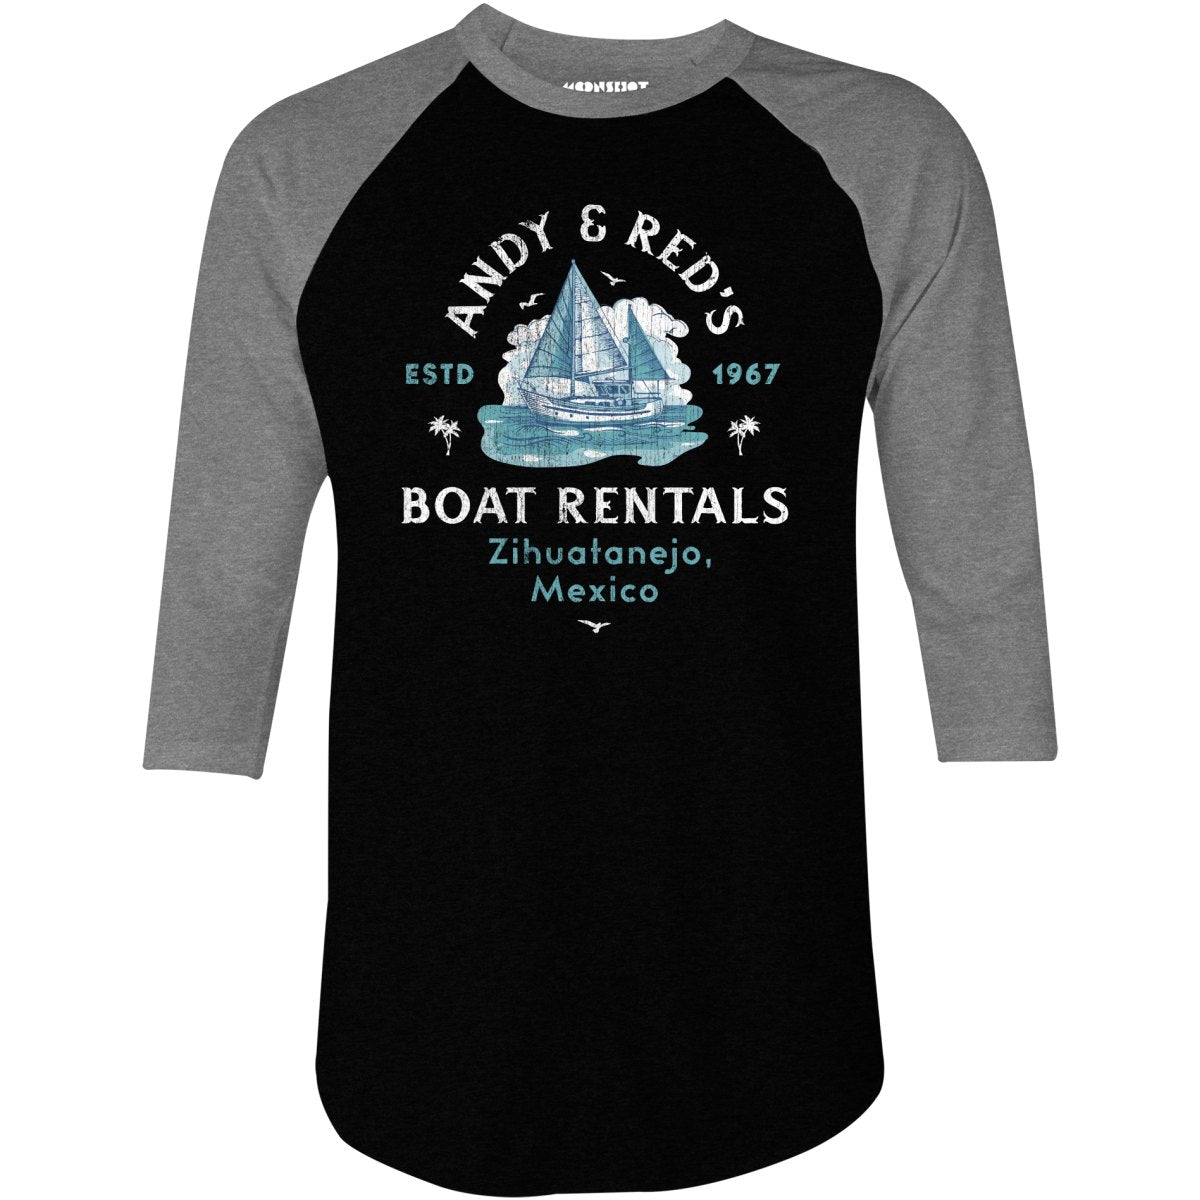 Andy & Red's Boat Rentals - 3/4 Sleeve Raglan T-Shirt